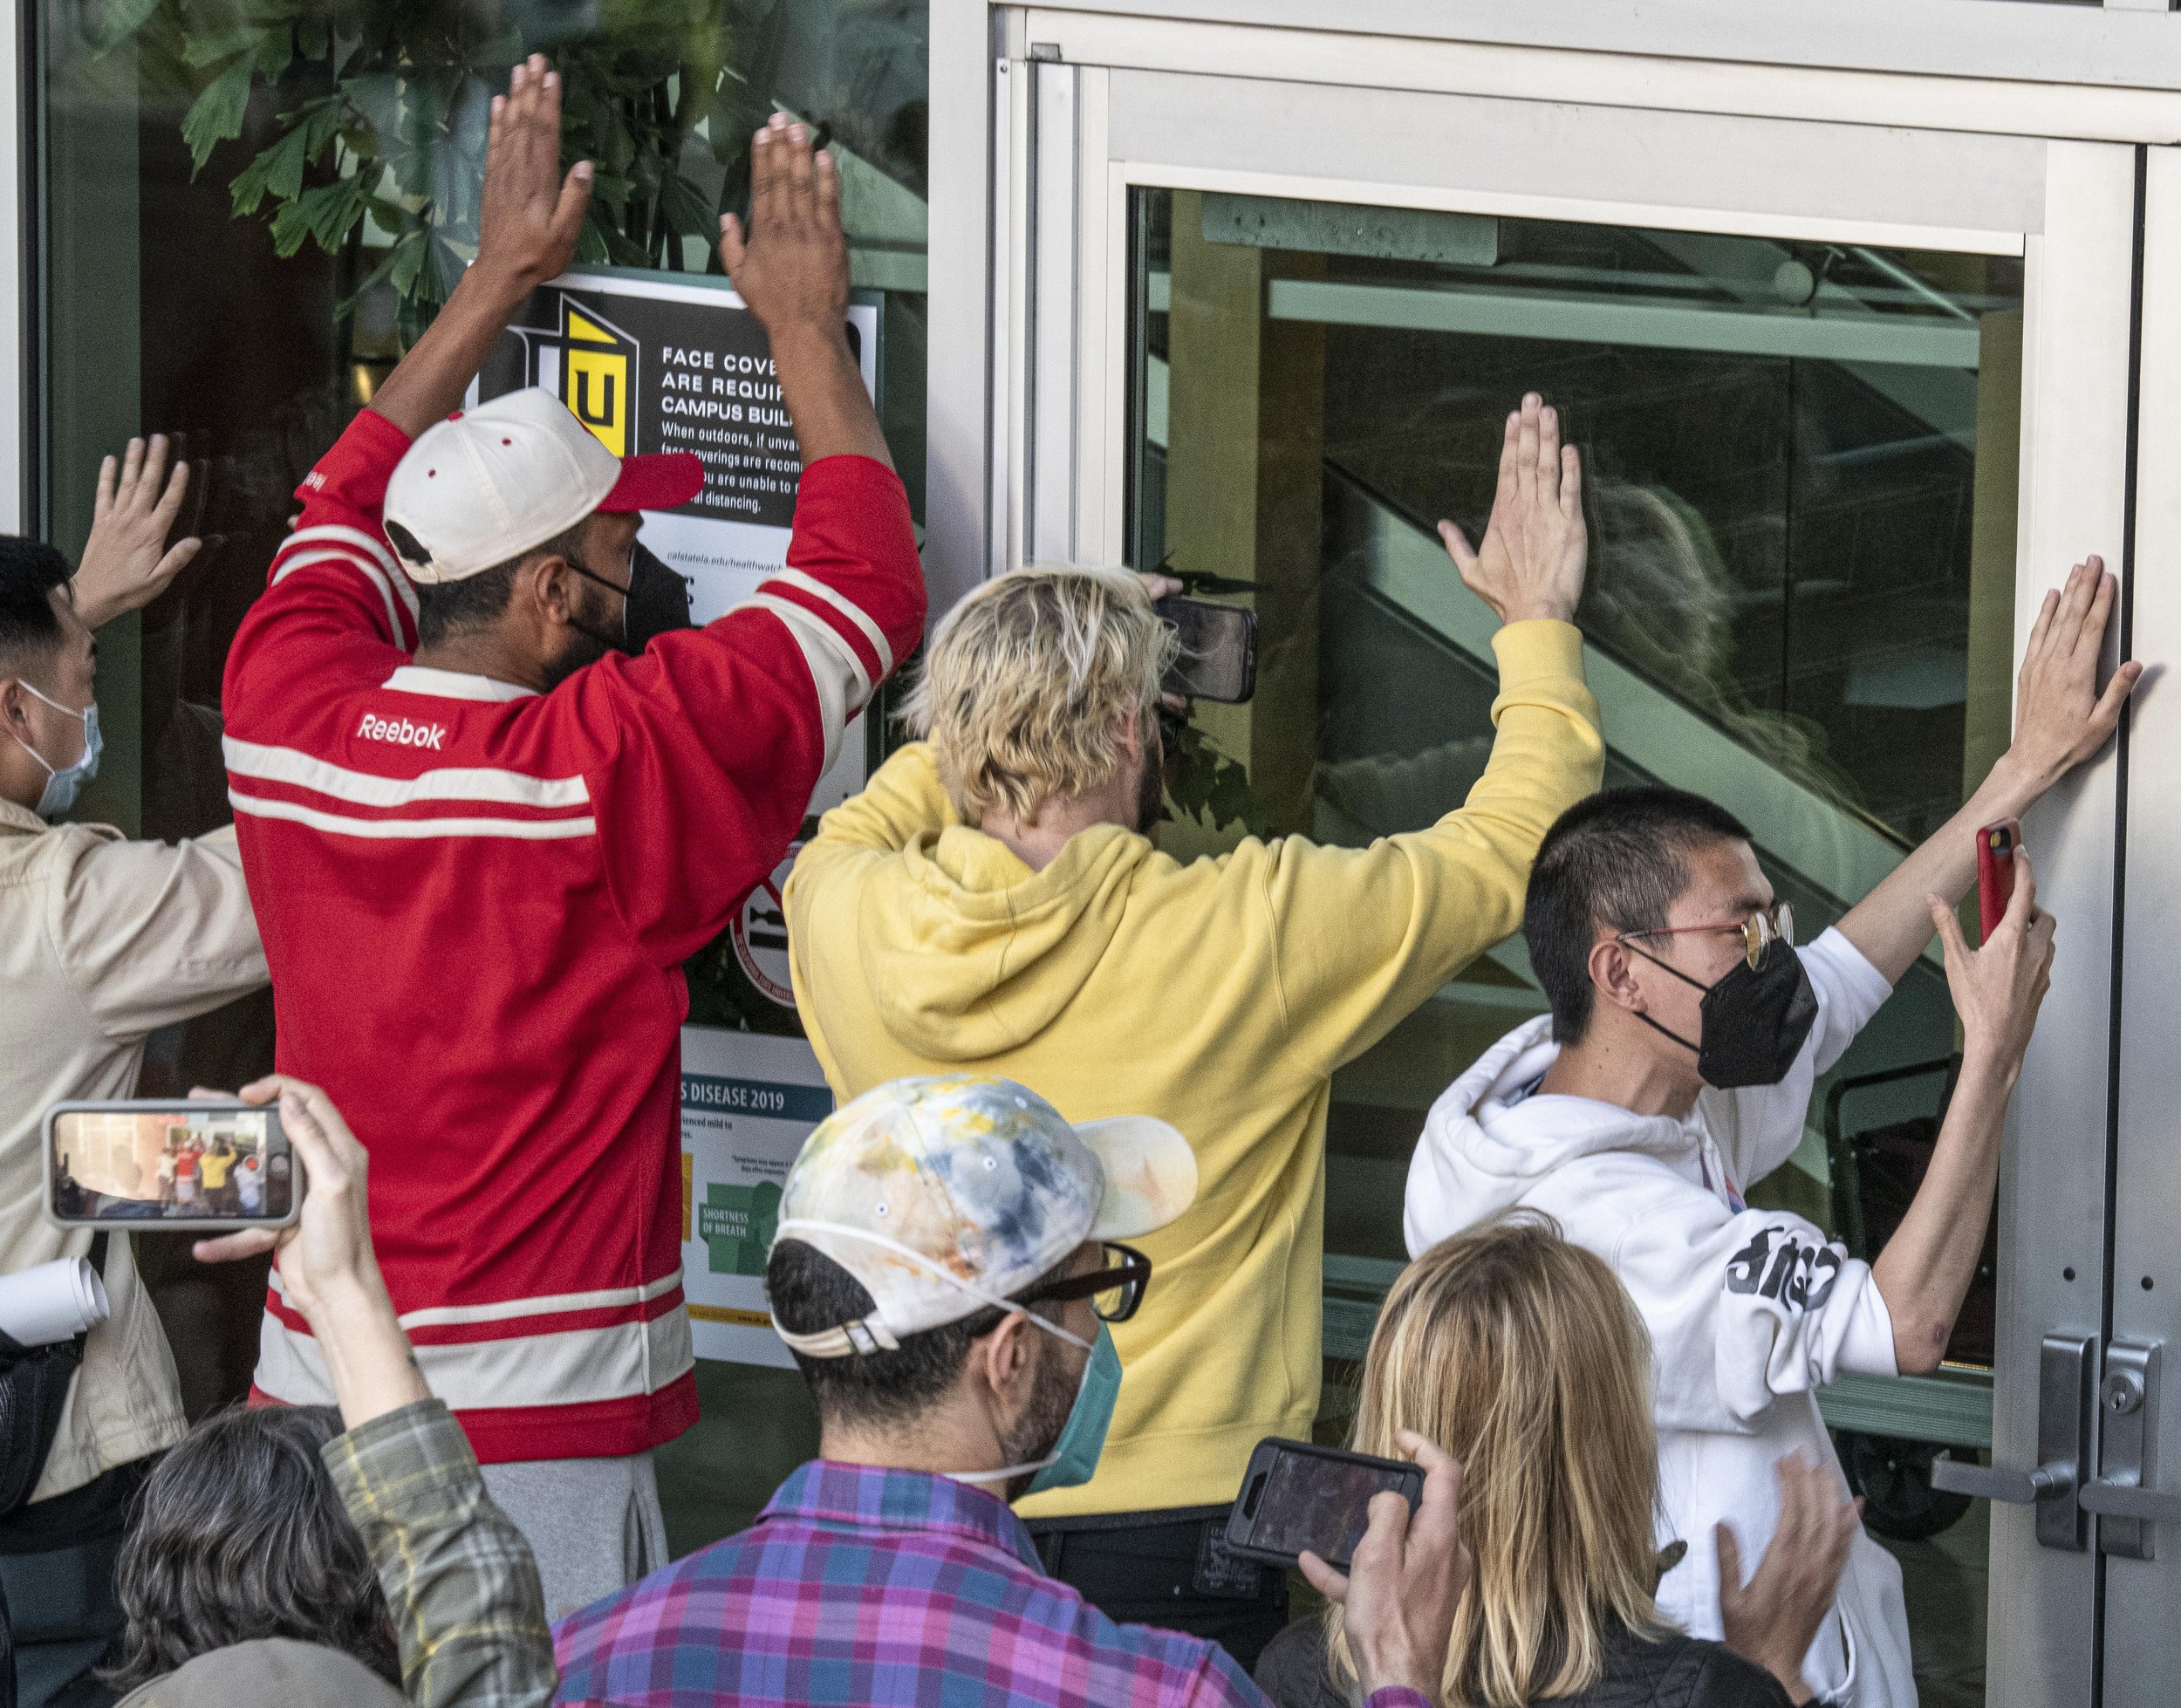  Protestors outside the University Student Union bang on the windows of the building as they are locked out of the current Mayoral debate taking place with only a very limited select few participants allowed in on Sunday May 1, 2022 at the Mayoral de